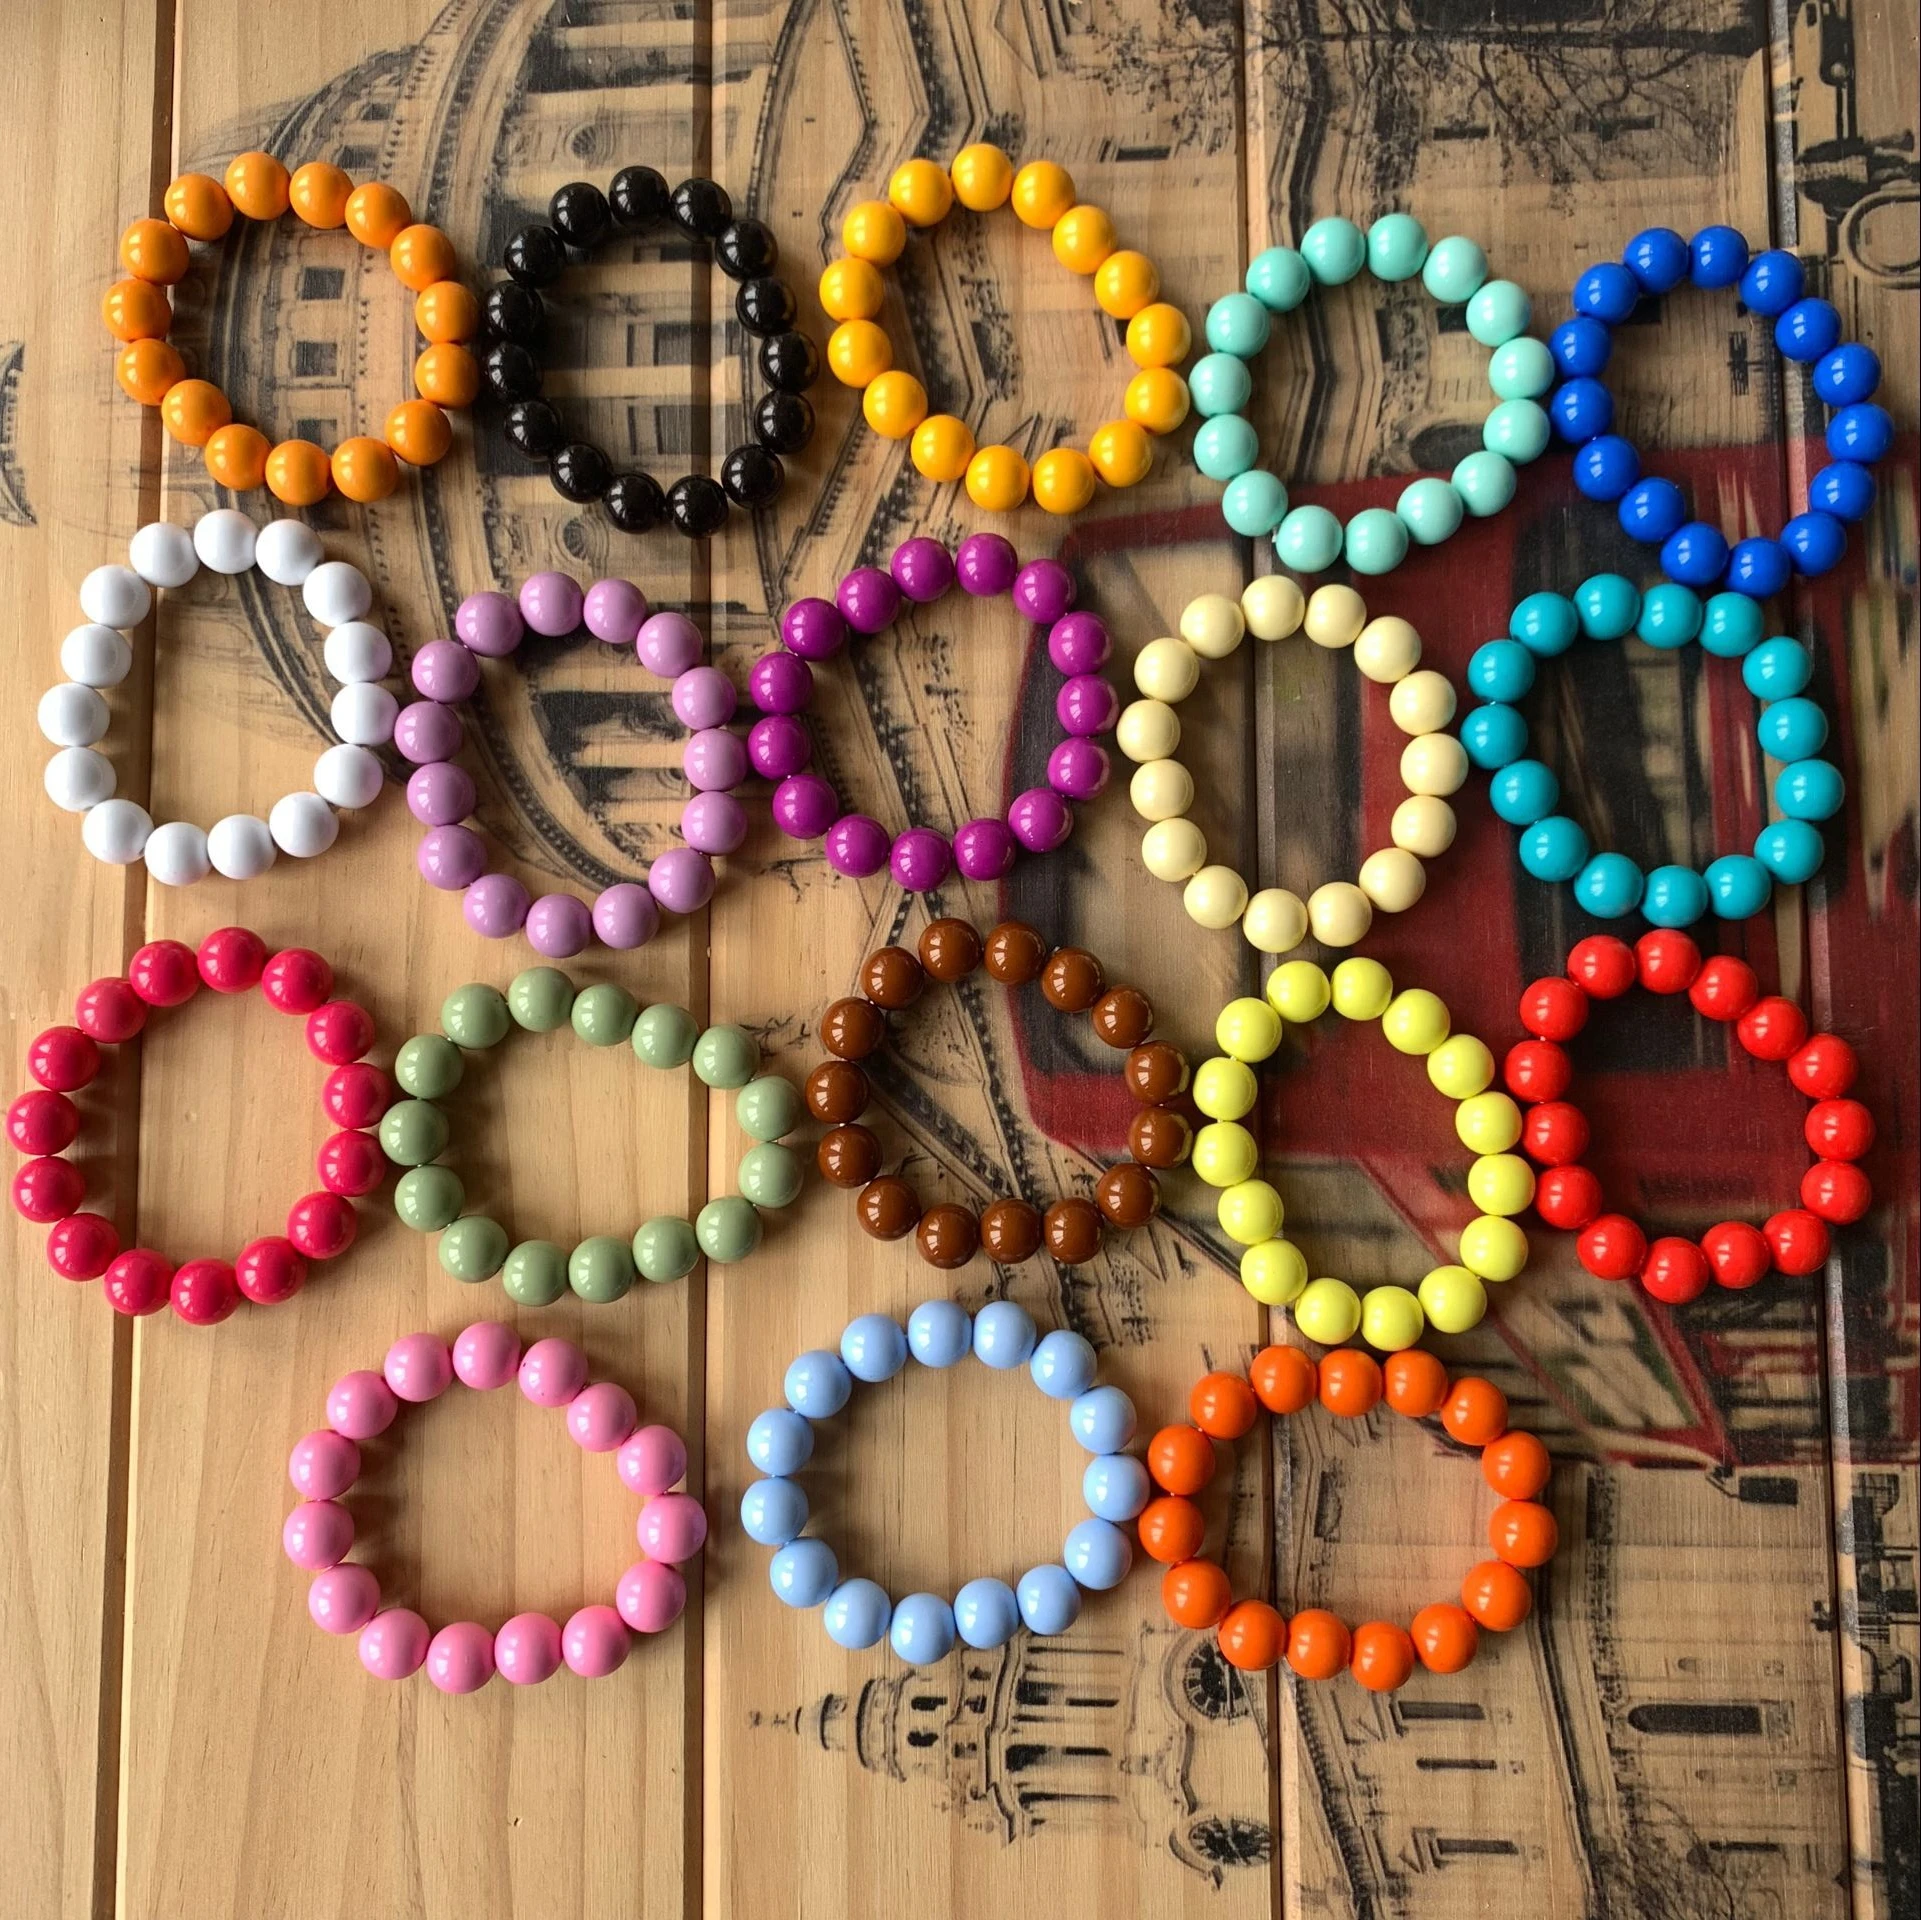 Adjustable Mood Bracelet for Women 2 Pieces Dazzling Shimmer Color Changing  Beads Based on Emotions Thermochromic Bead Bracelets for Kids and Adult -  Walmart.com